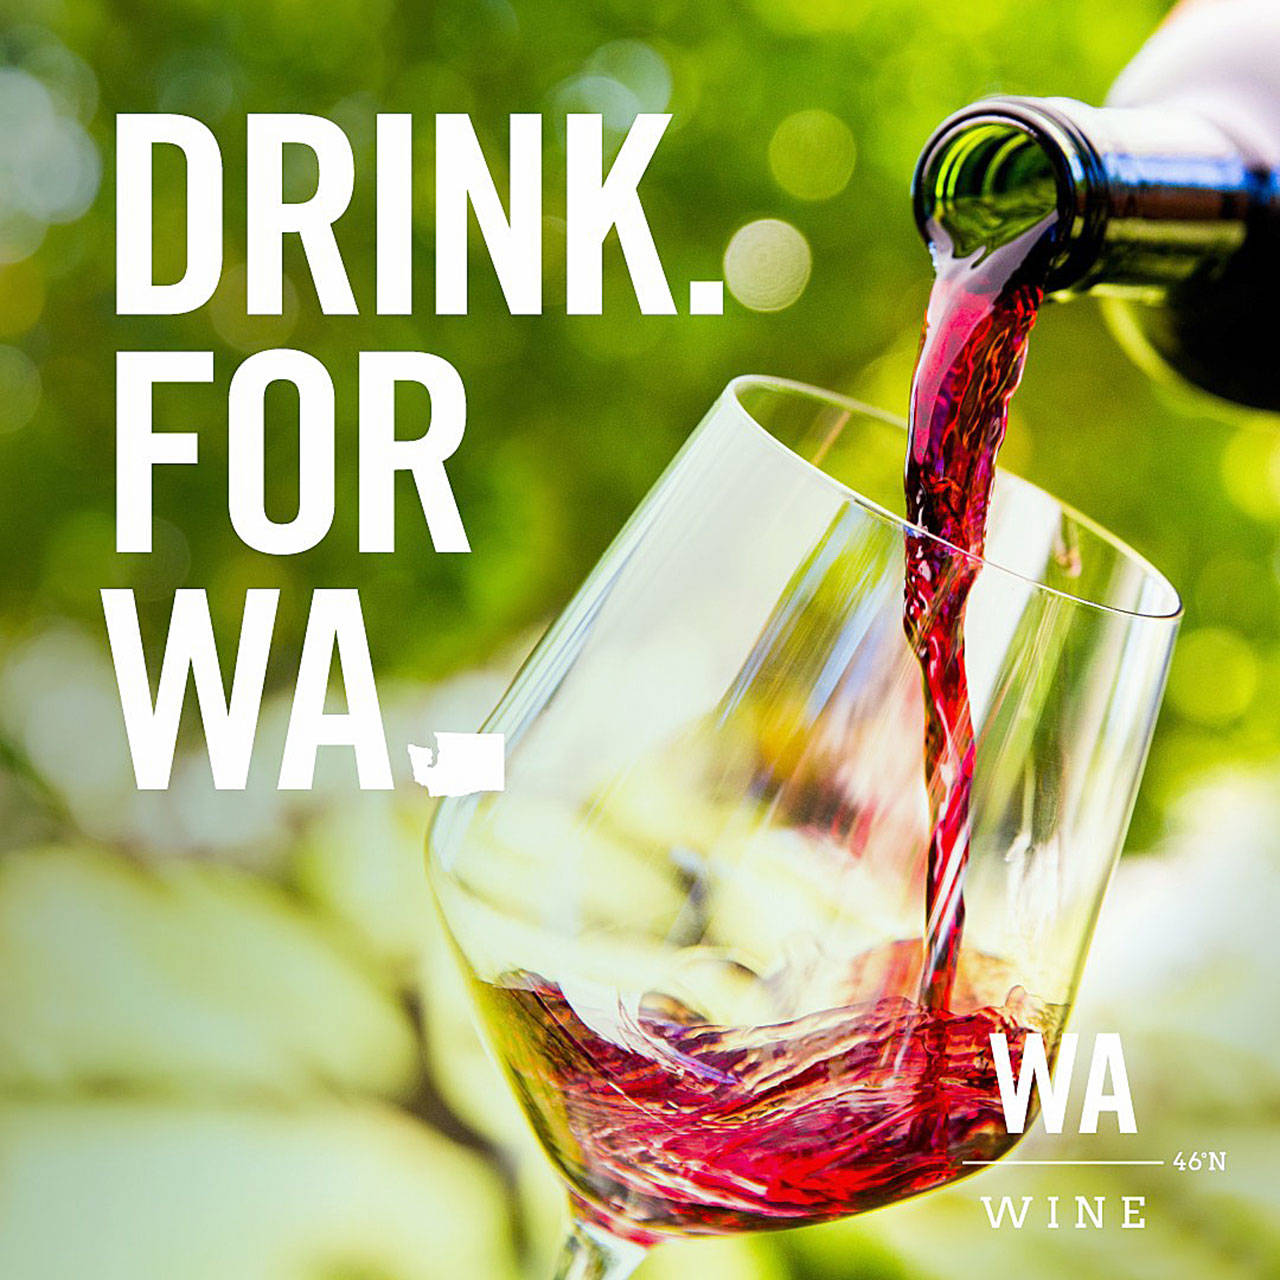 The Washington State Wine Commission is using August, known for decades as Washington Wine Month, to promote the Drink For WA campaign. The commission estimates it will generate 12 million impressions through advertising and social media channels. (Washington State Wine Commission)